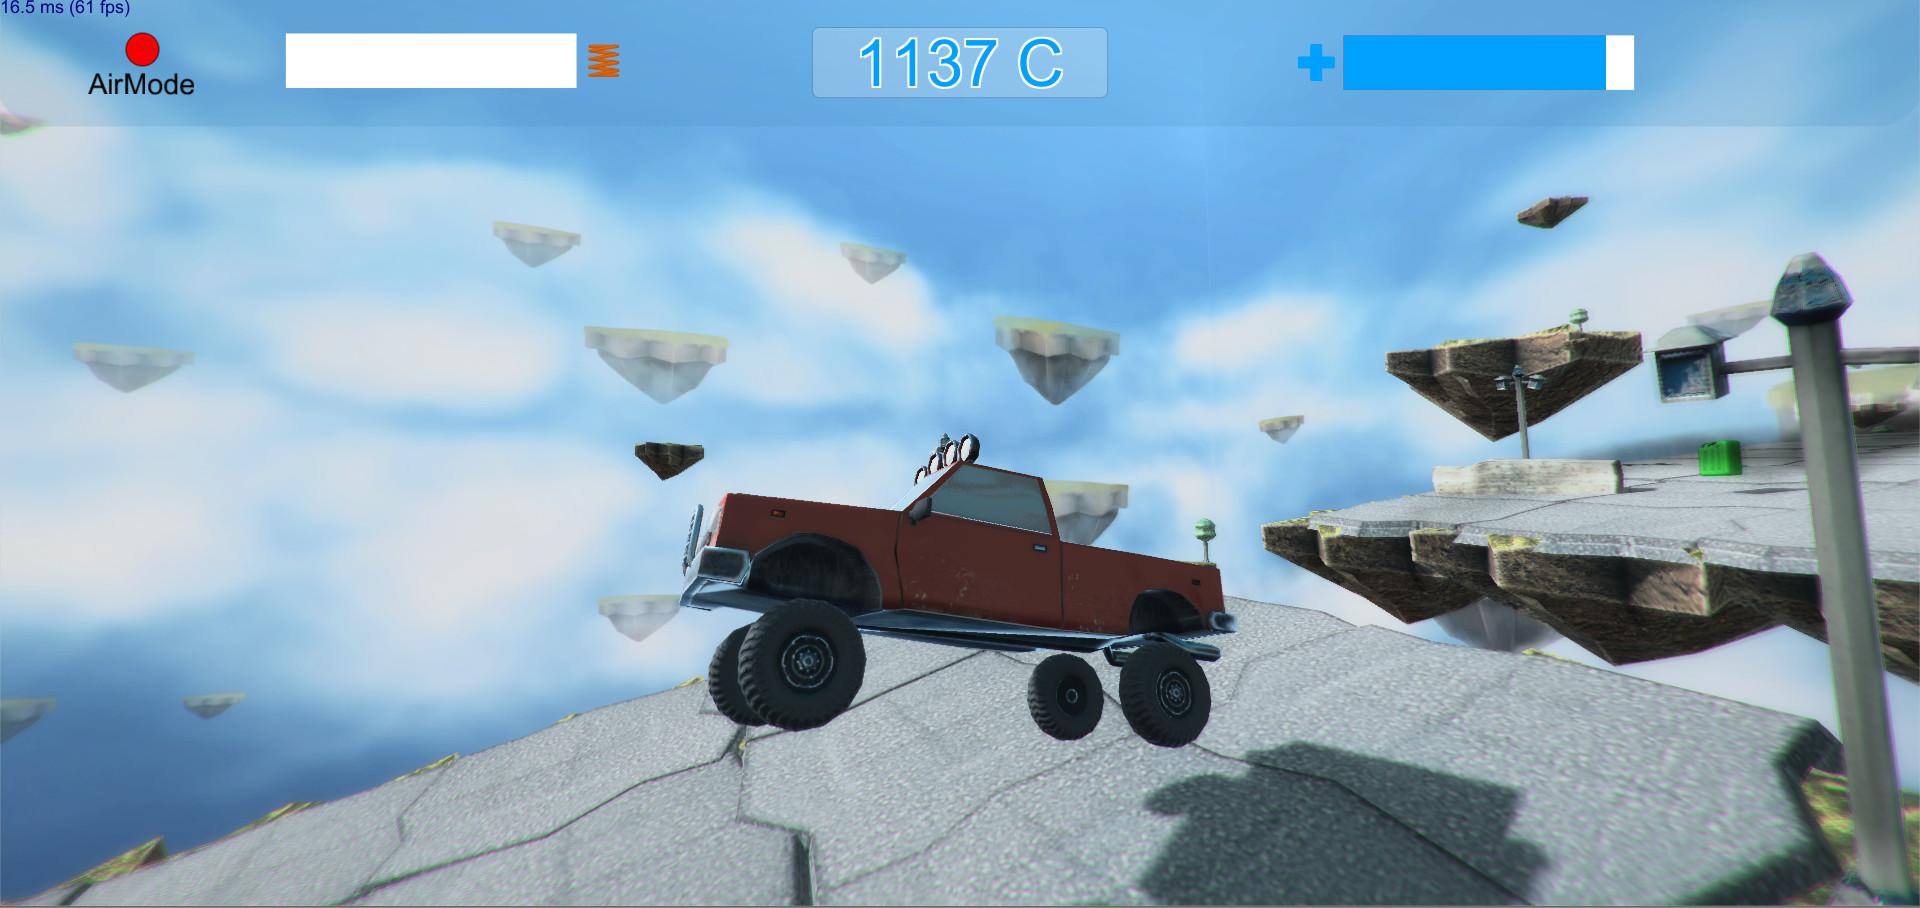 Screenshot №2 from game CrazyCars3D